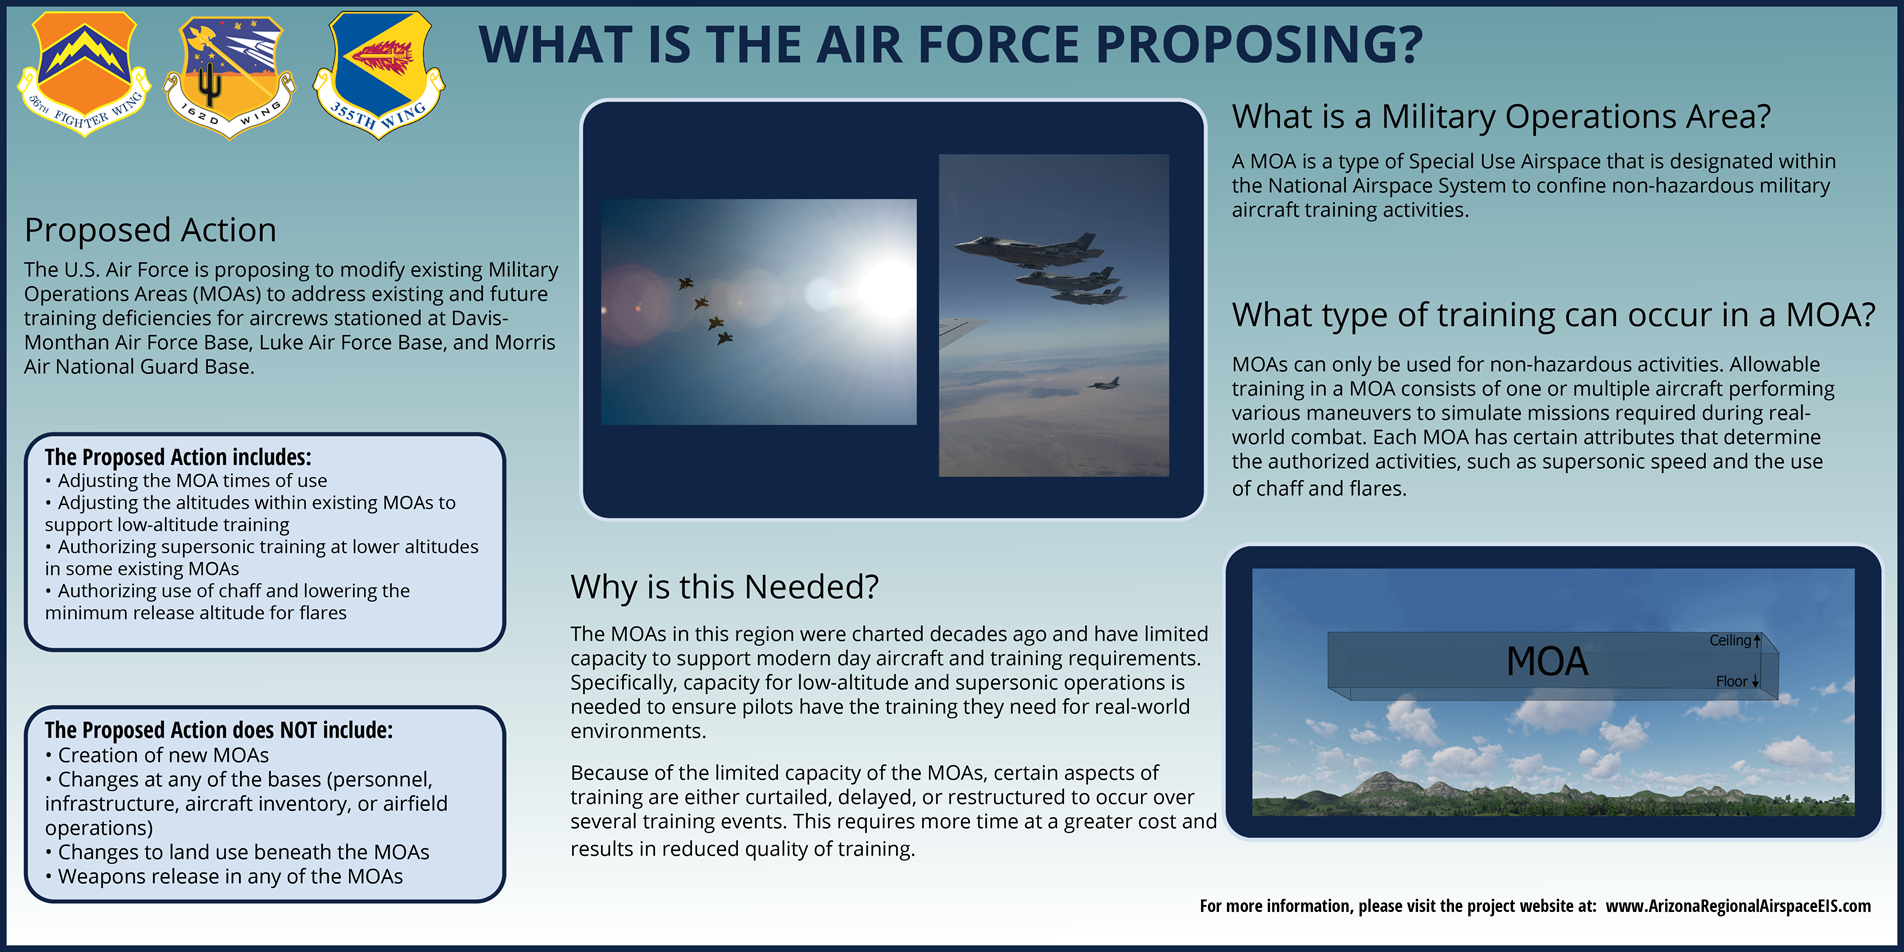 What Is The Air Force Proposing?